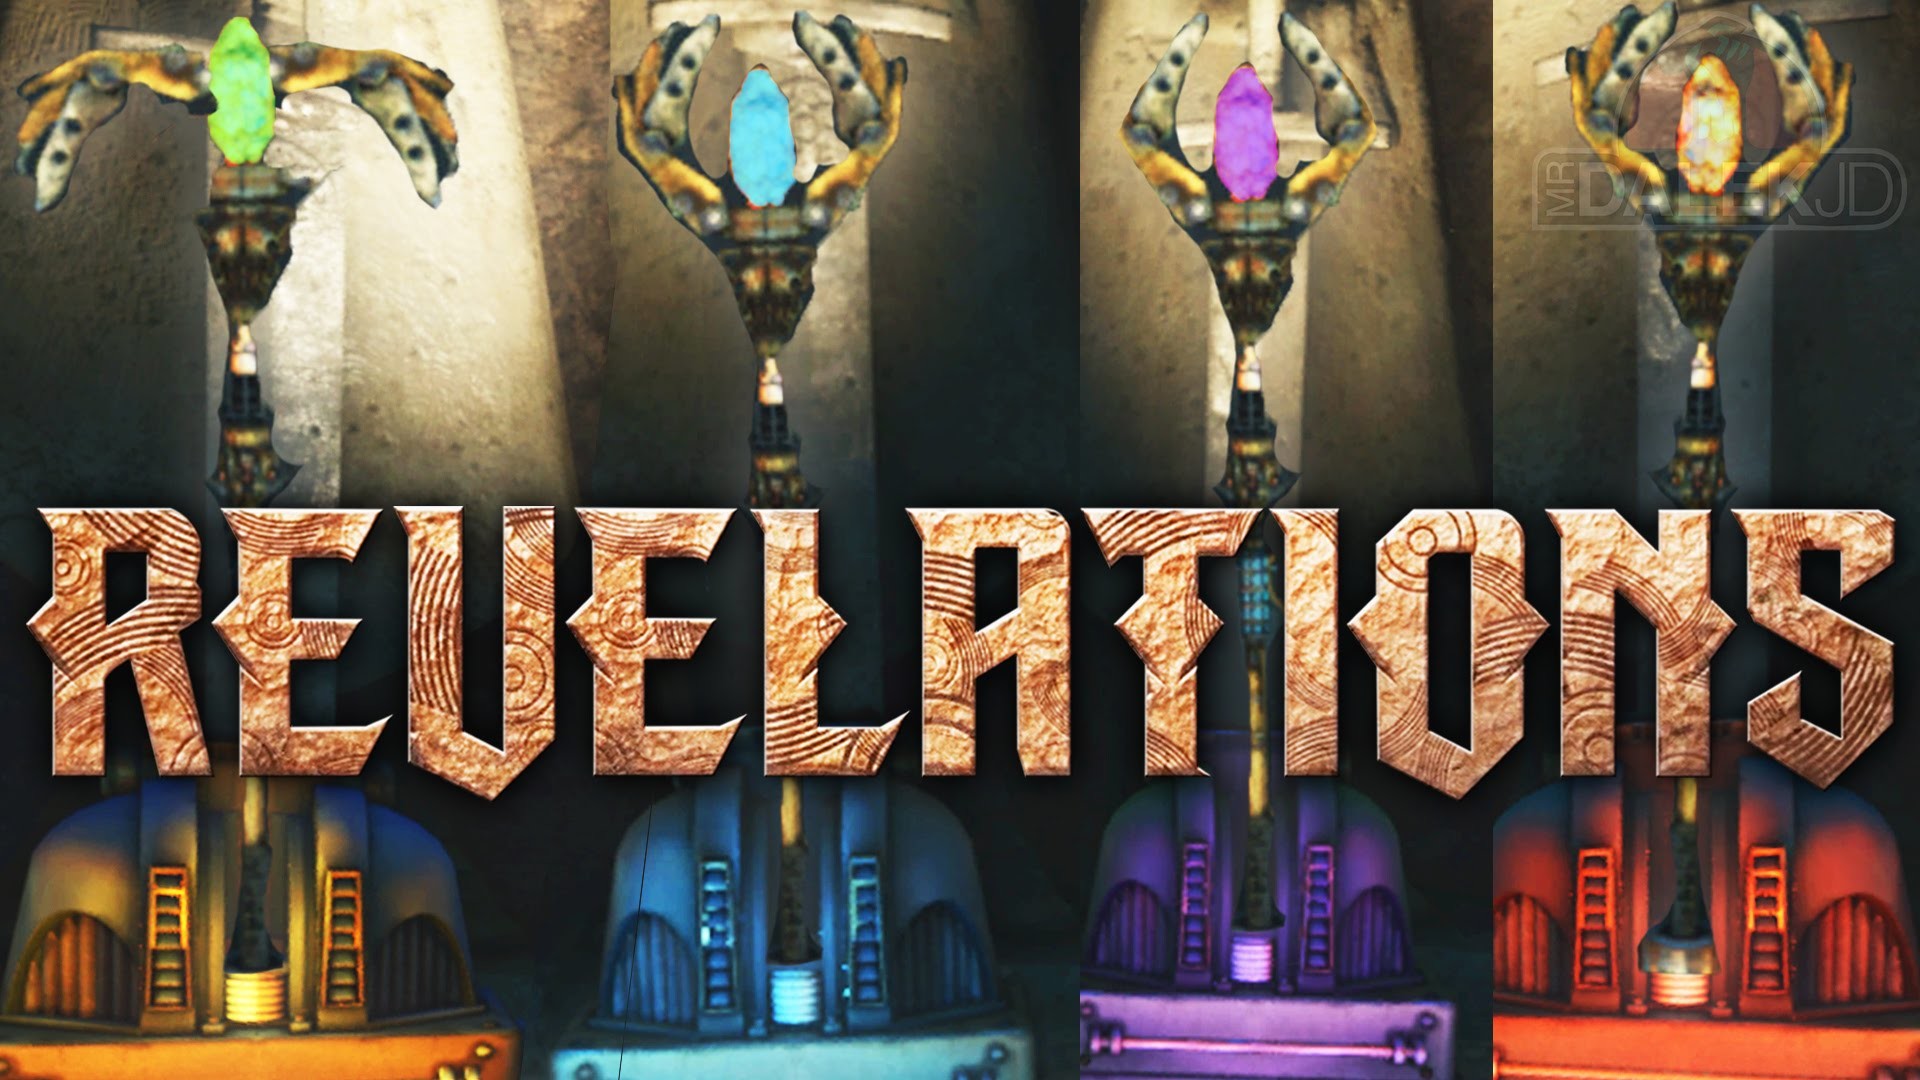 revelations black ops 3 zombies